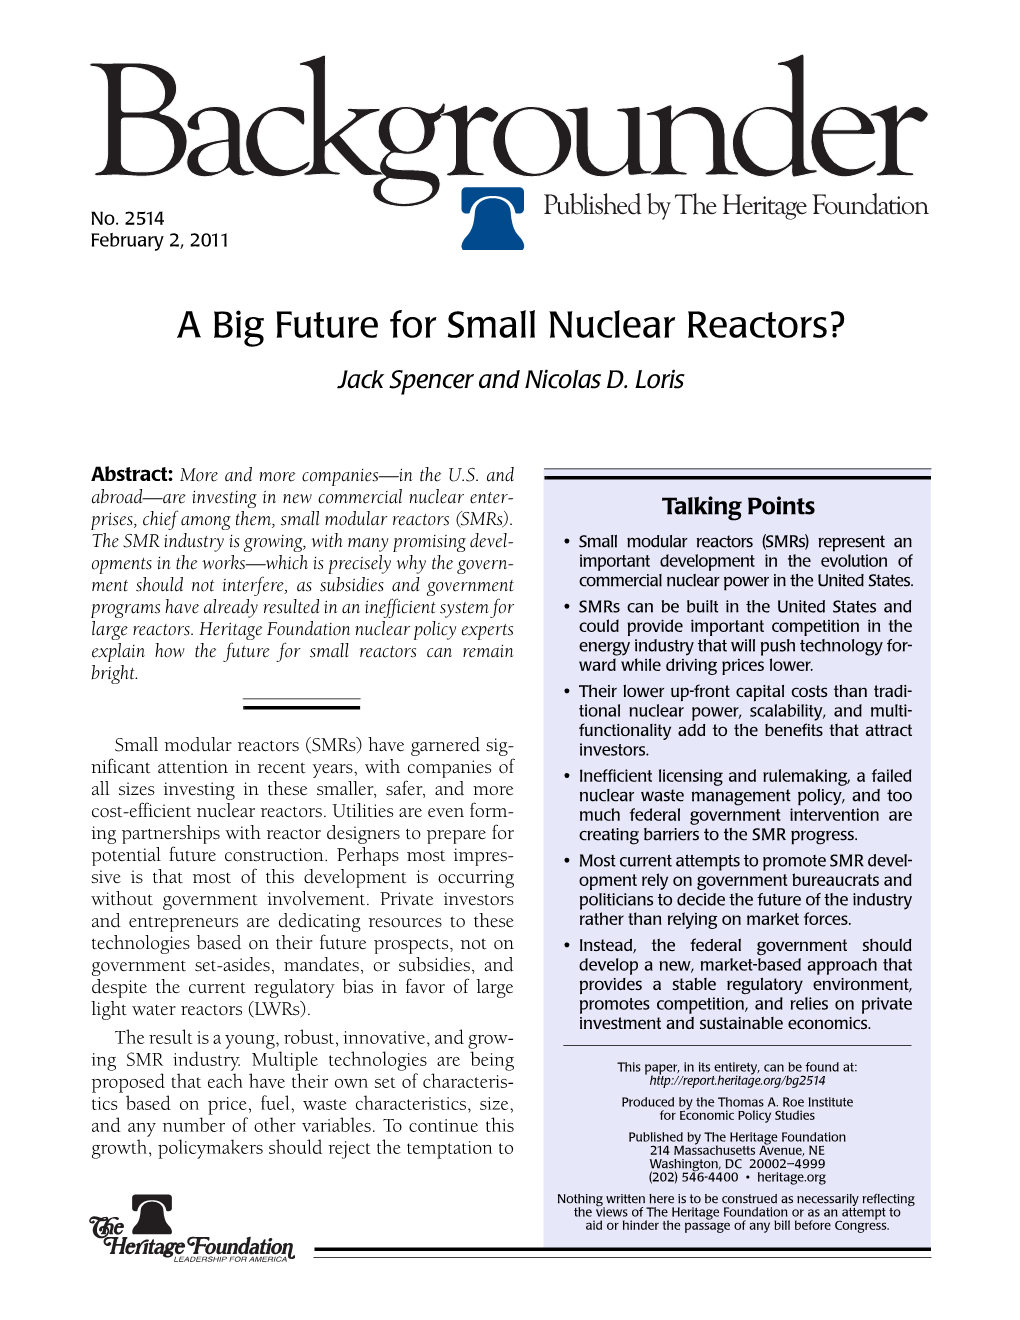 A Big Future for Small Nuclear Reactors? Jack Spencer and Nicolas D